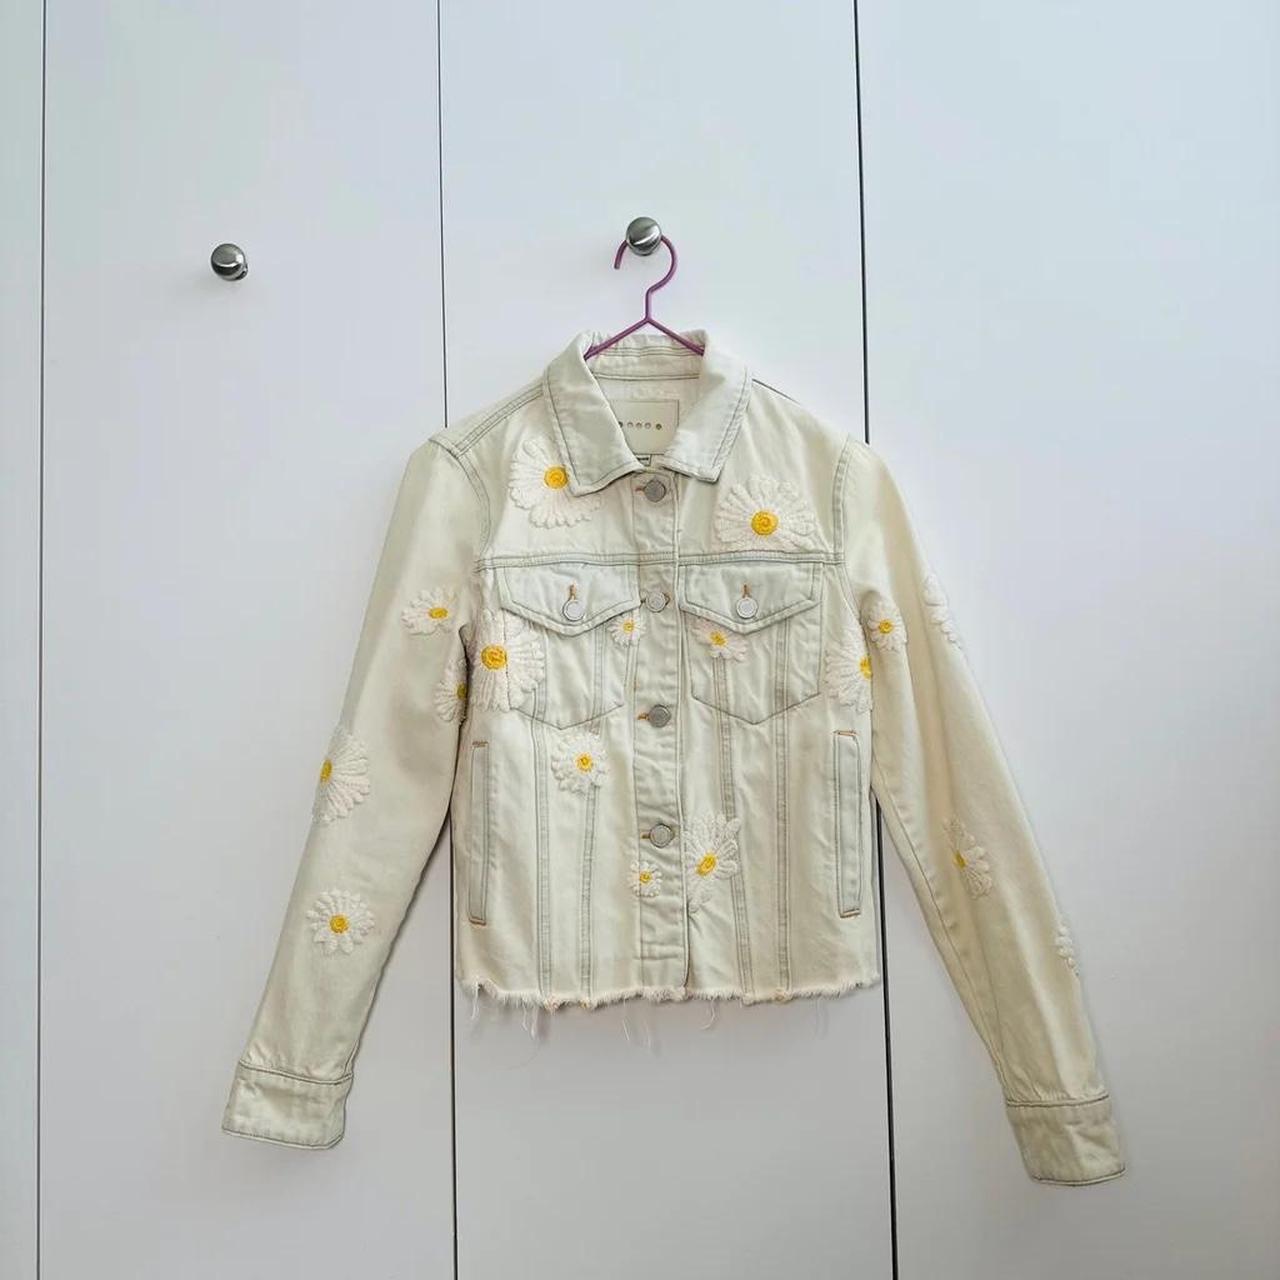 VTG city girl yellow jean jacket with embroidery. - Depop